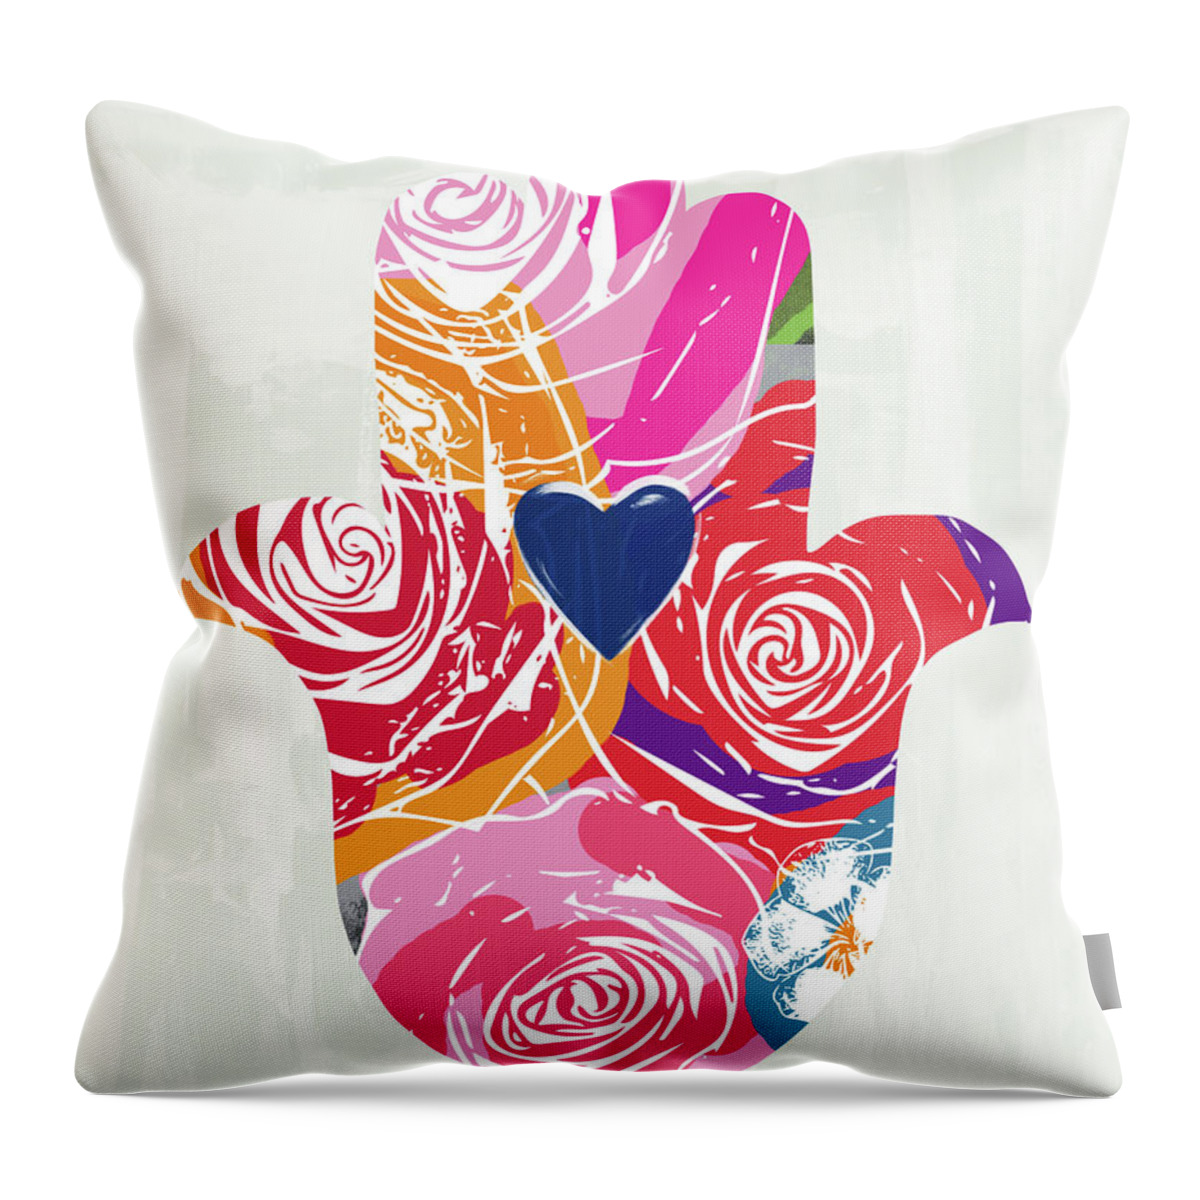 Floral Throw Pillow featuring the mixed media Bold Floral Hamsa- Art by Linda Woods by Linda Woods